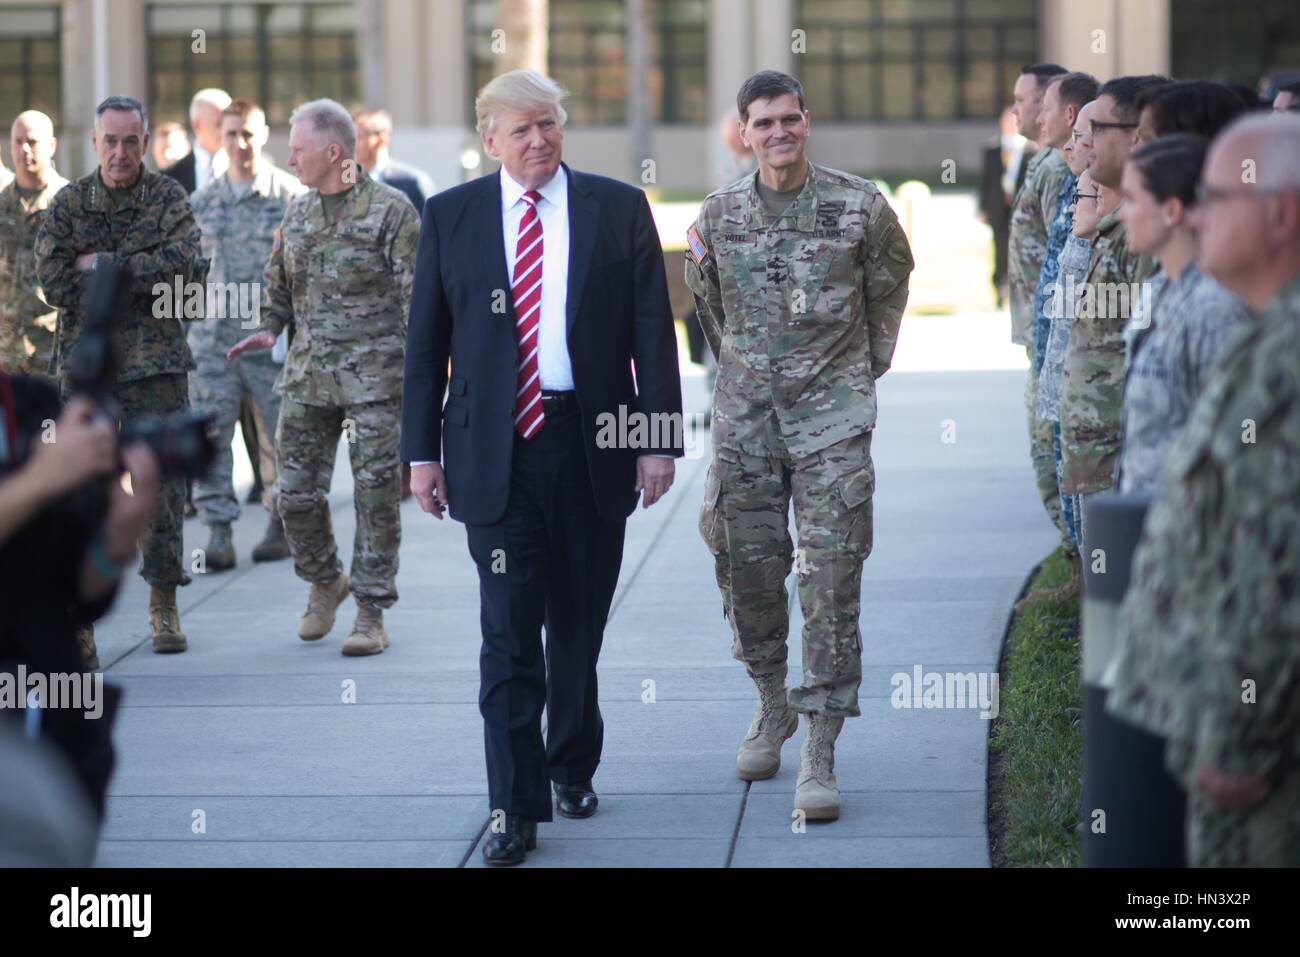 U.S President Donald Trump walks past soldiers escorted by U.S. Army Gen. Joseph Votel during a visit to U.S. Central Command at MacDill Air Force Base February 6, 2017 in Tampa, Florida. Credit: Planetpix/Alamy Live News Stock Photo